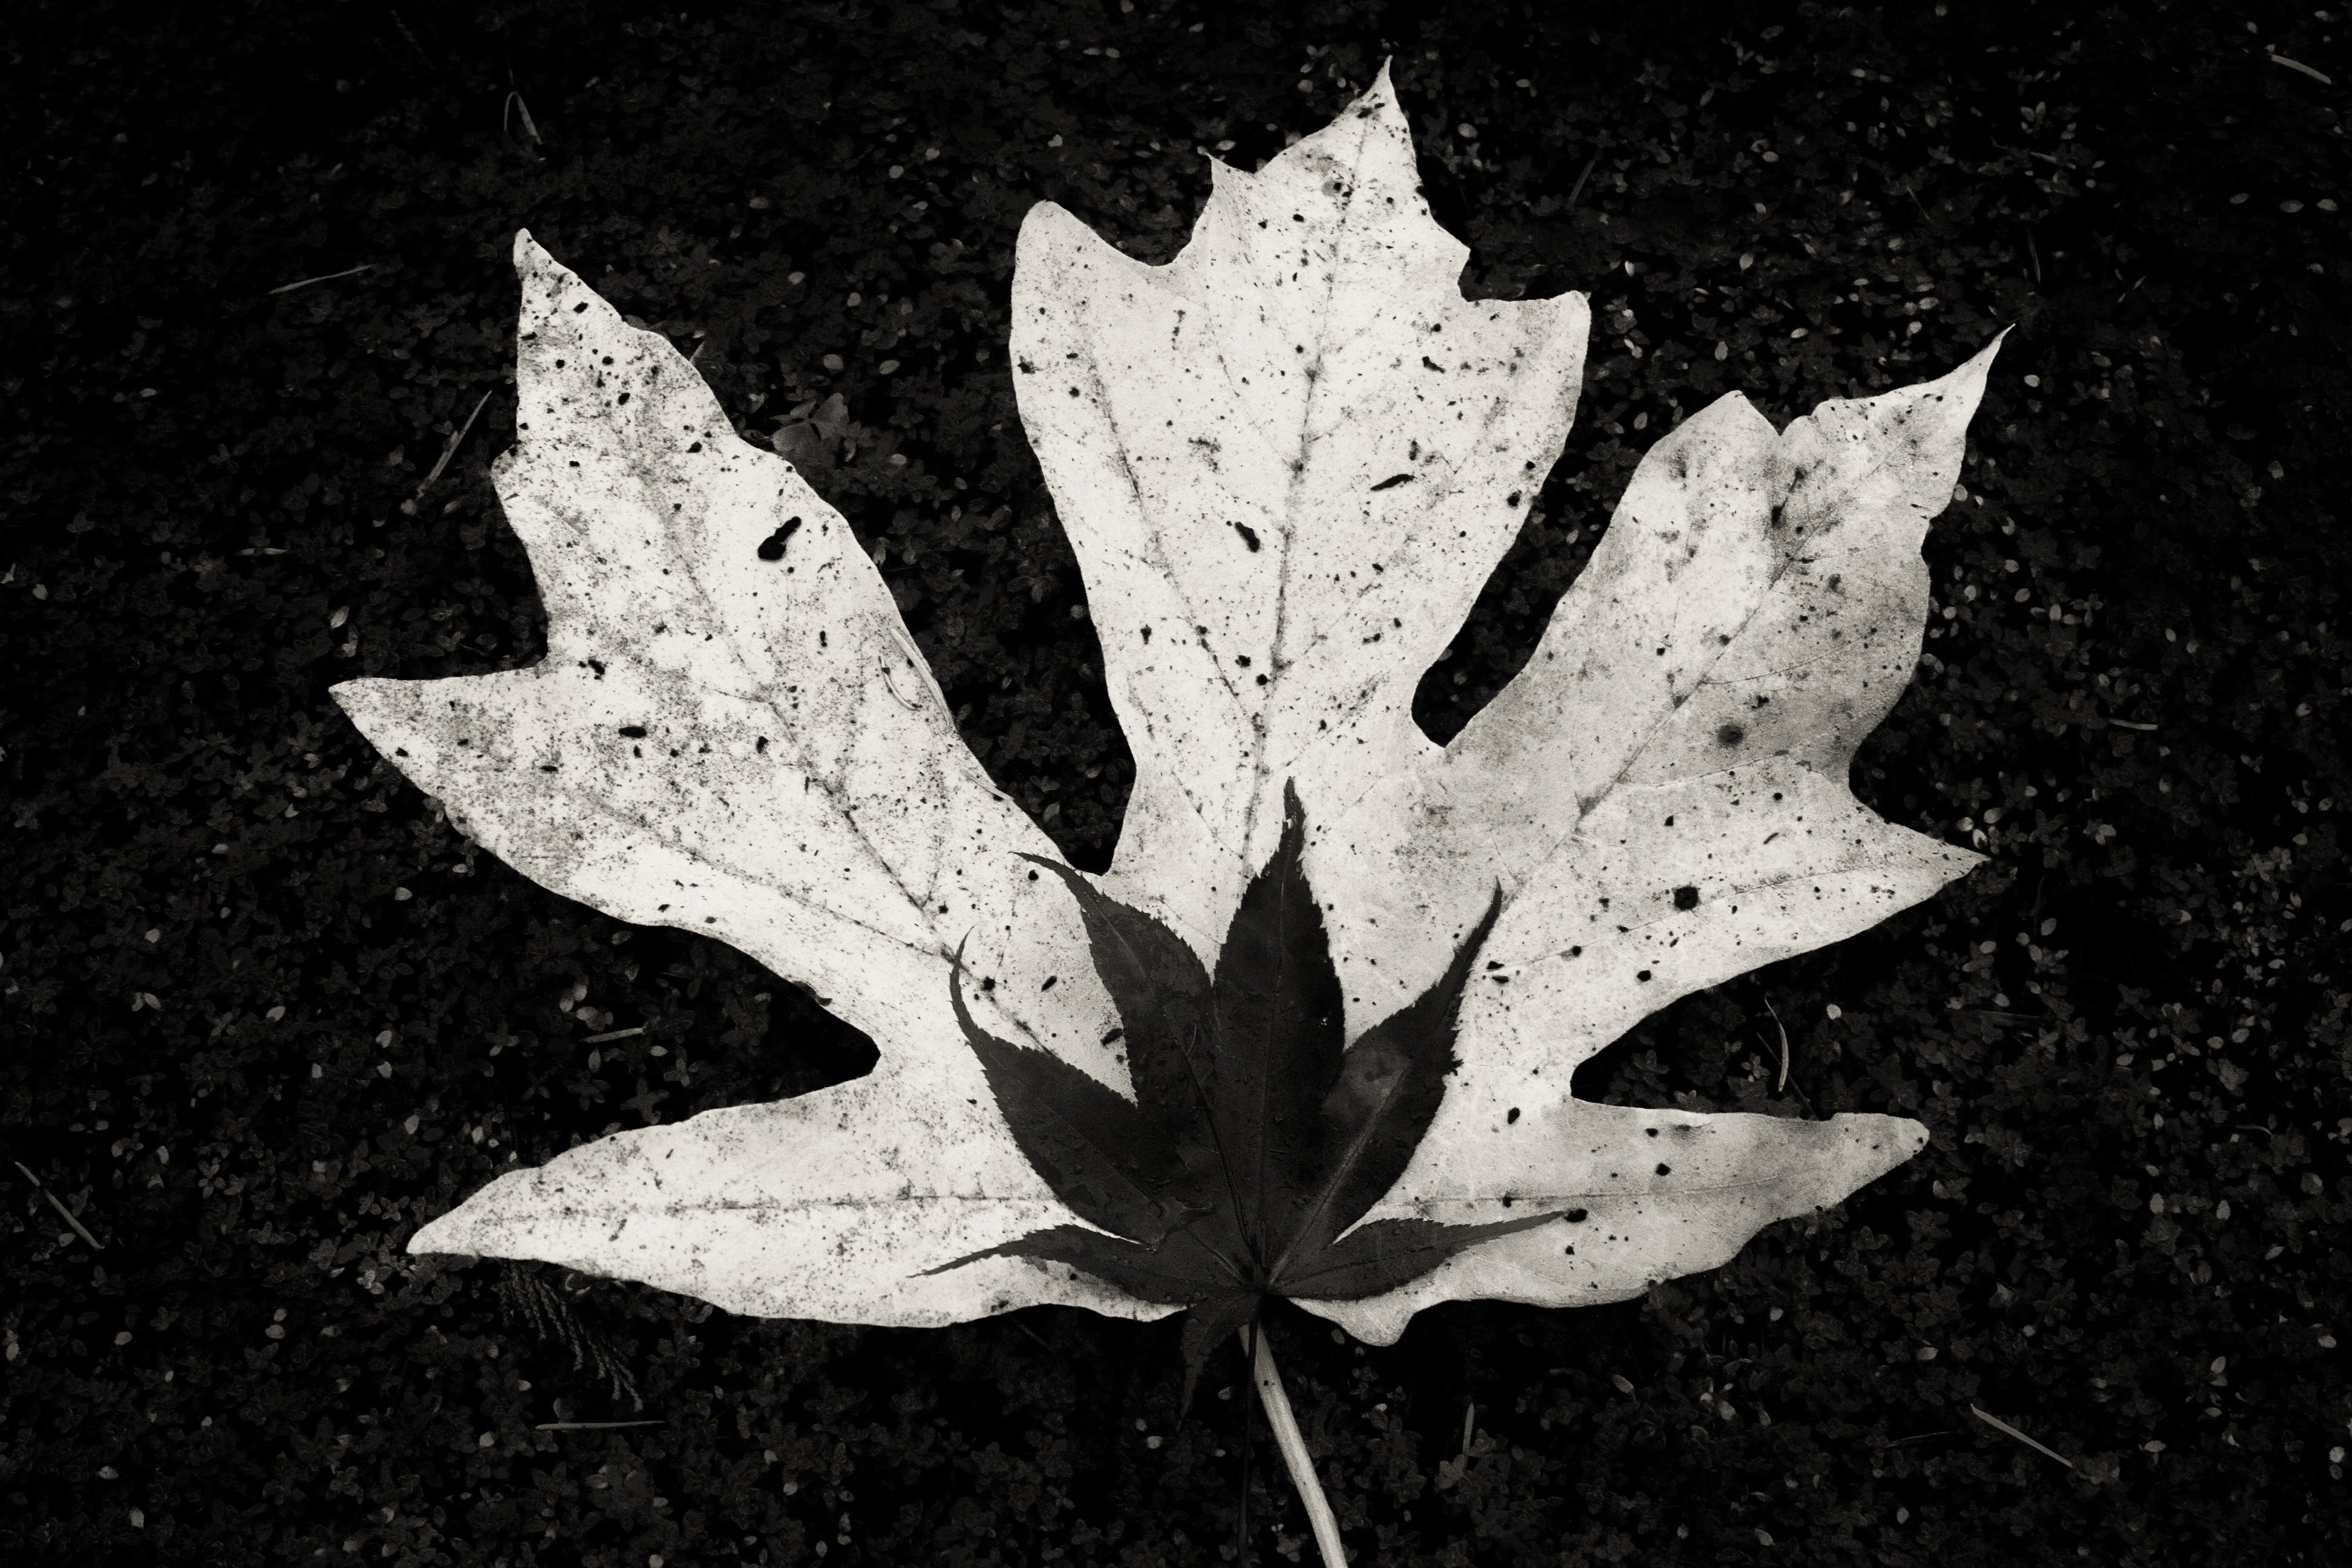 101: Two Leaves